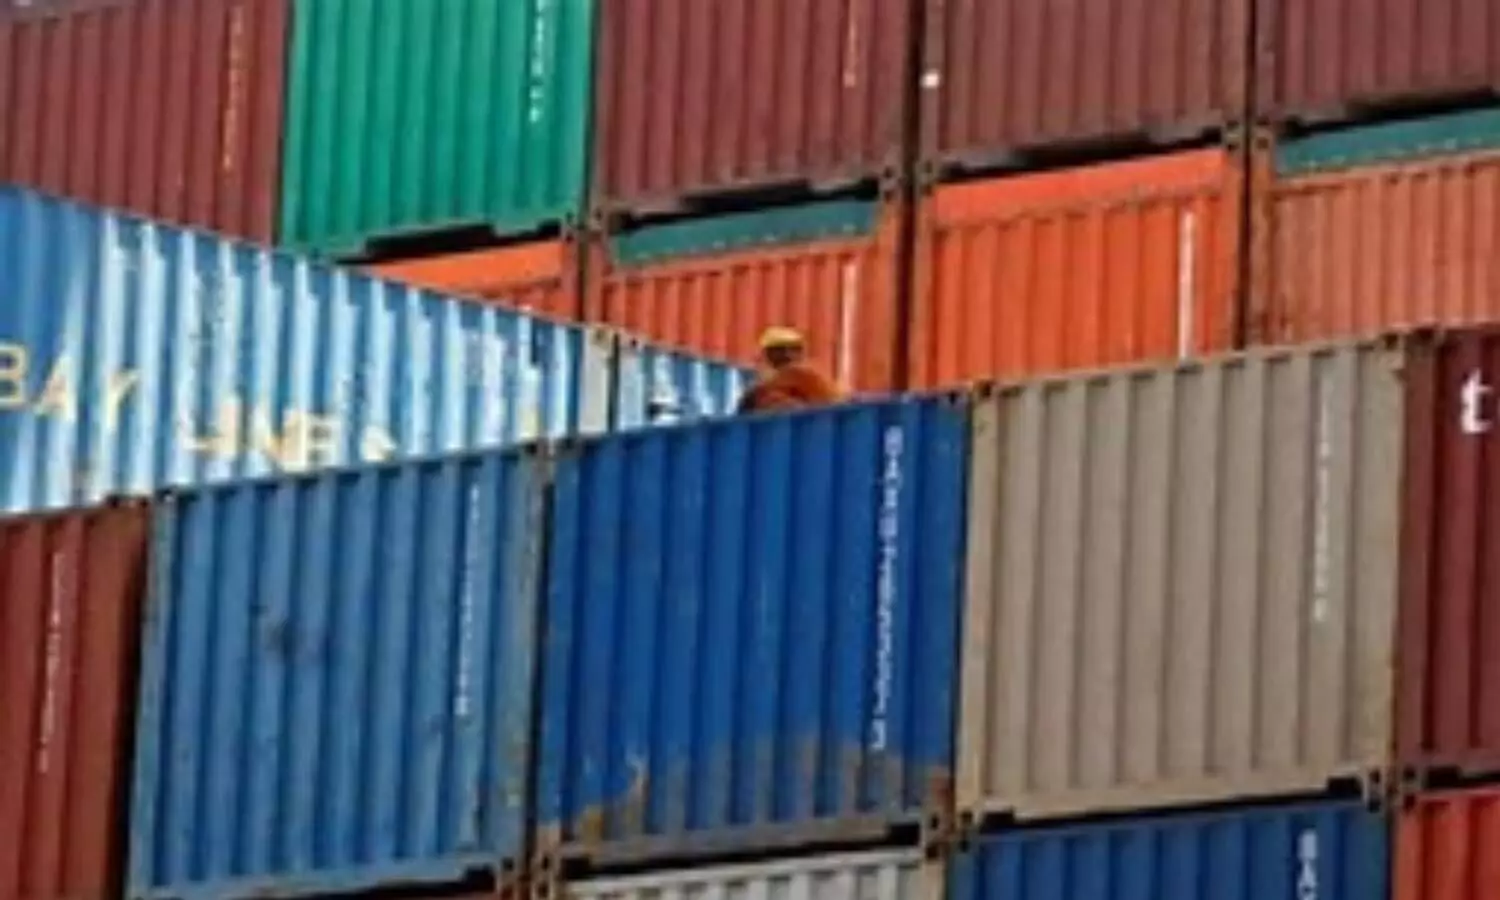 Indias exports jump 46% to $33.28 billion in August